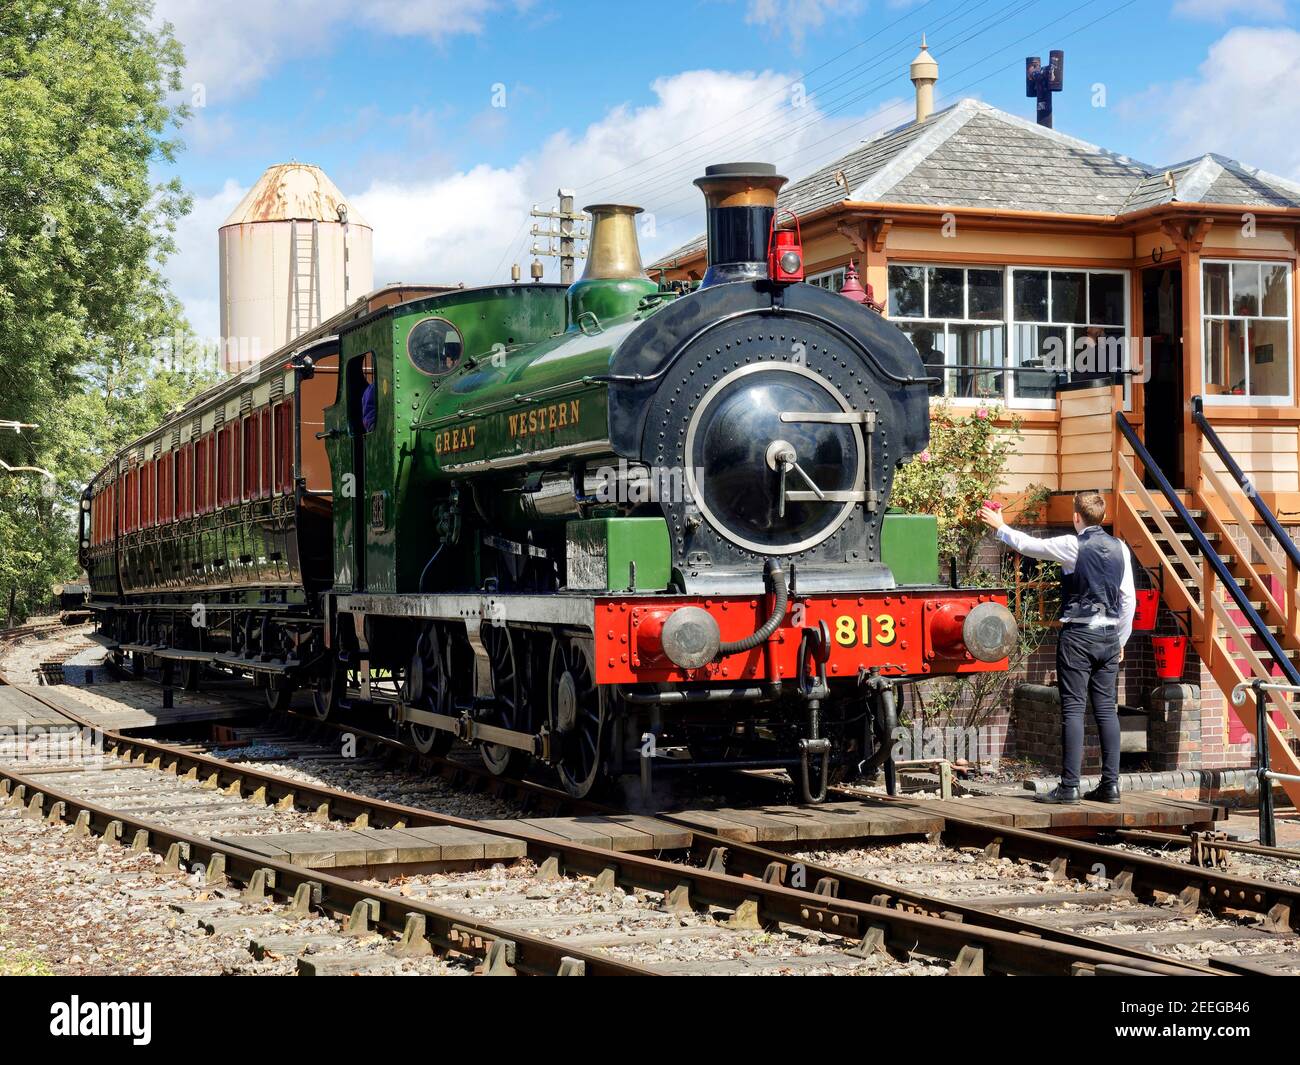 Great Western Railway steam train at the Didcot Railway centre demonstrating a branchline train from the 1920's - with Edwardian carriage and loco 813. Stock Photo